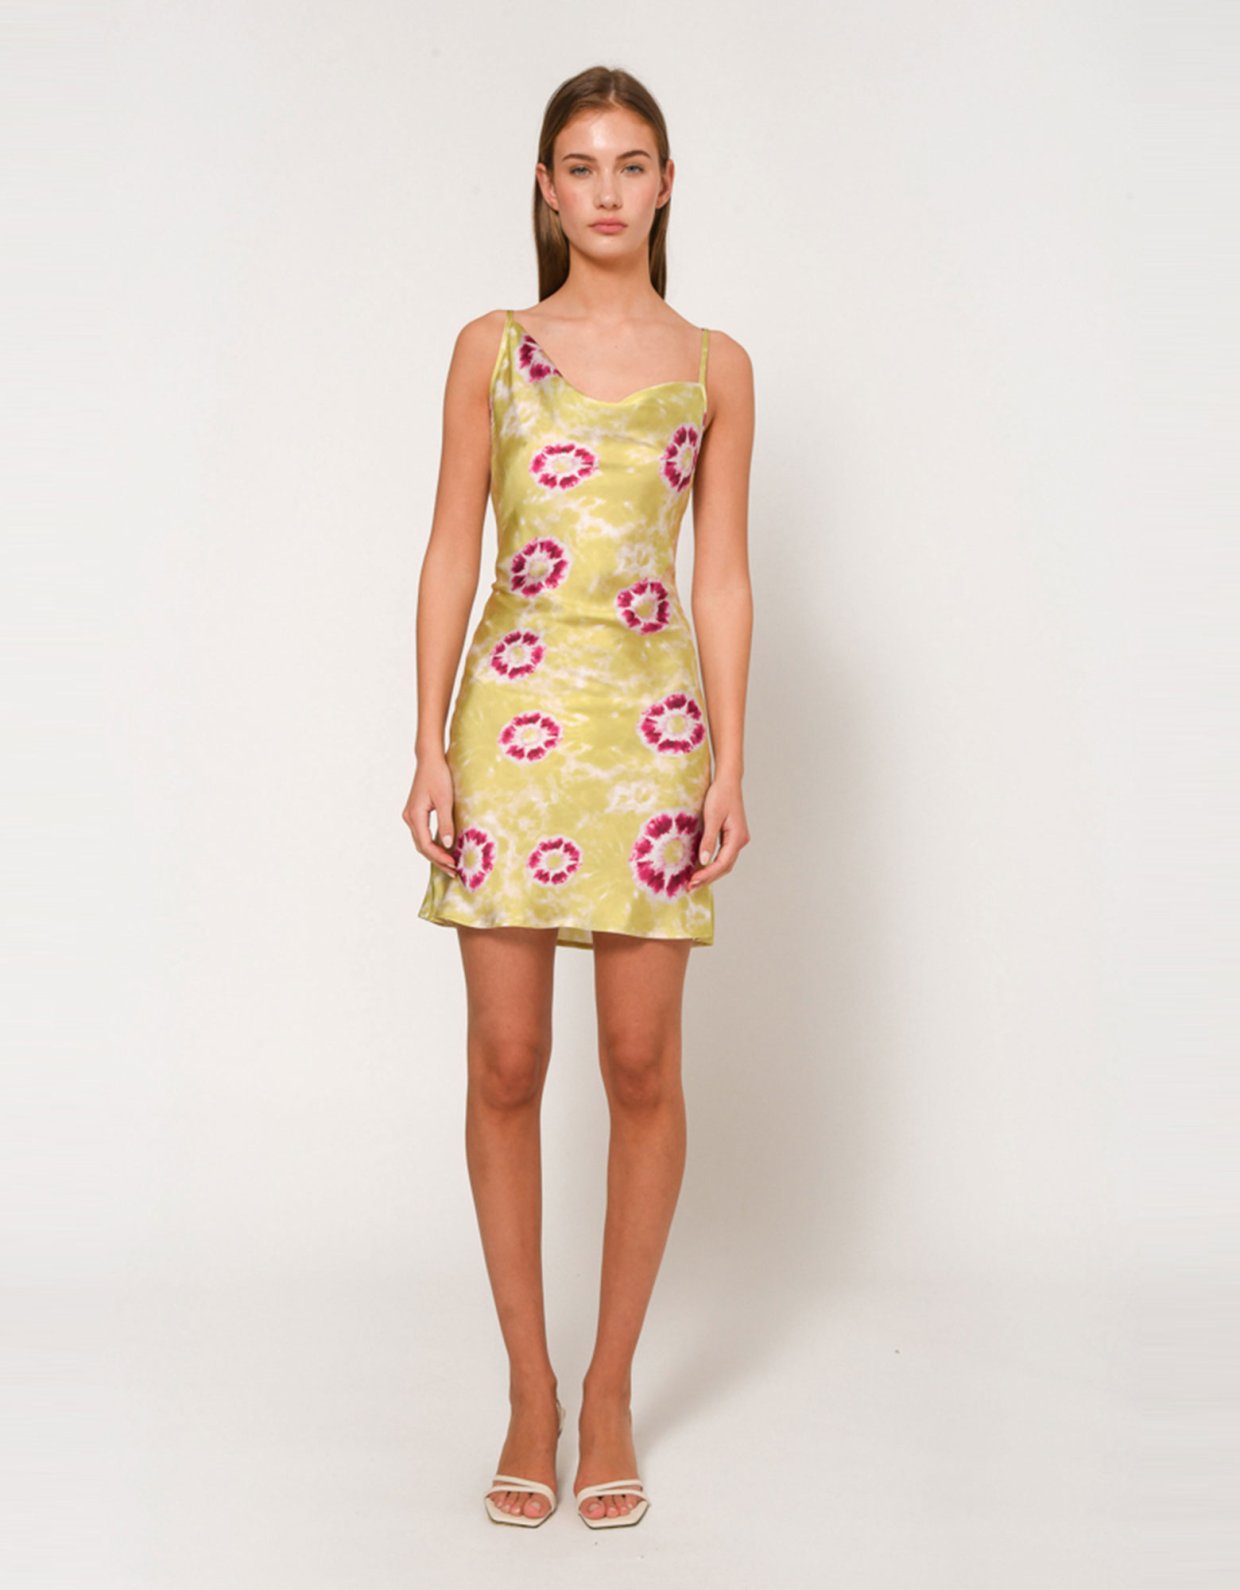 Sunset go Lina dress lime tie die